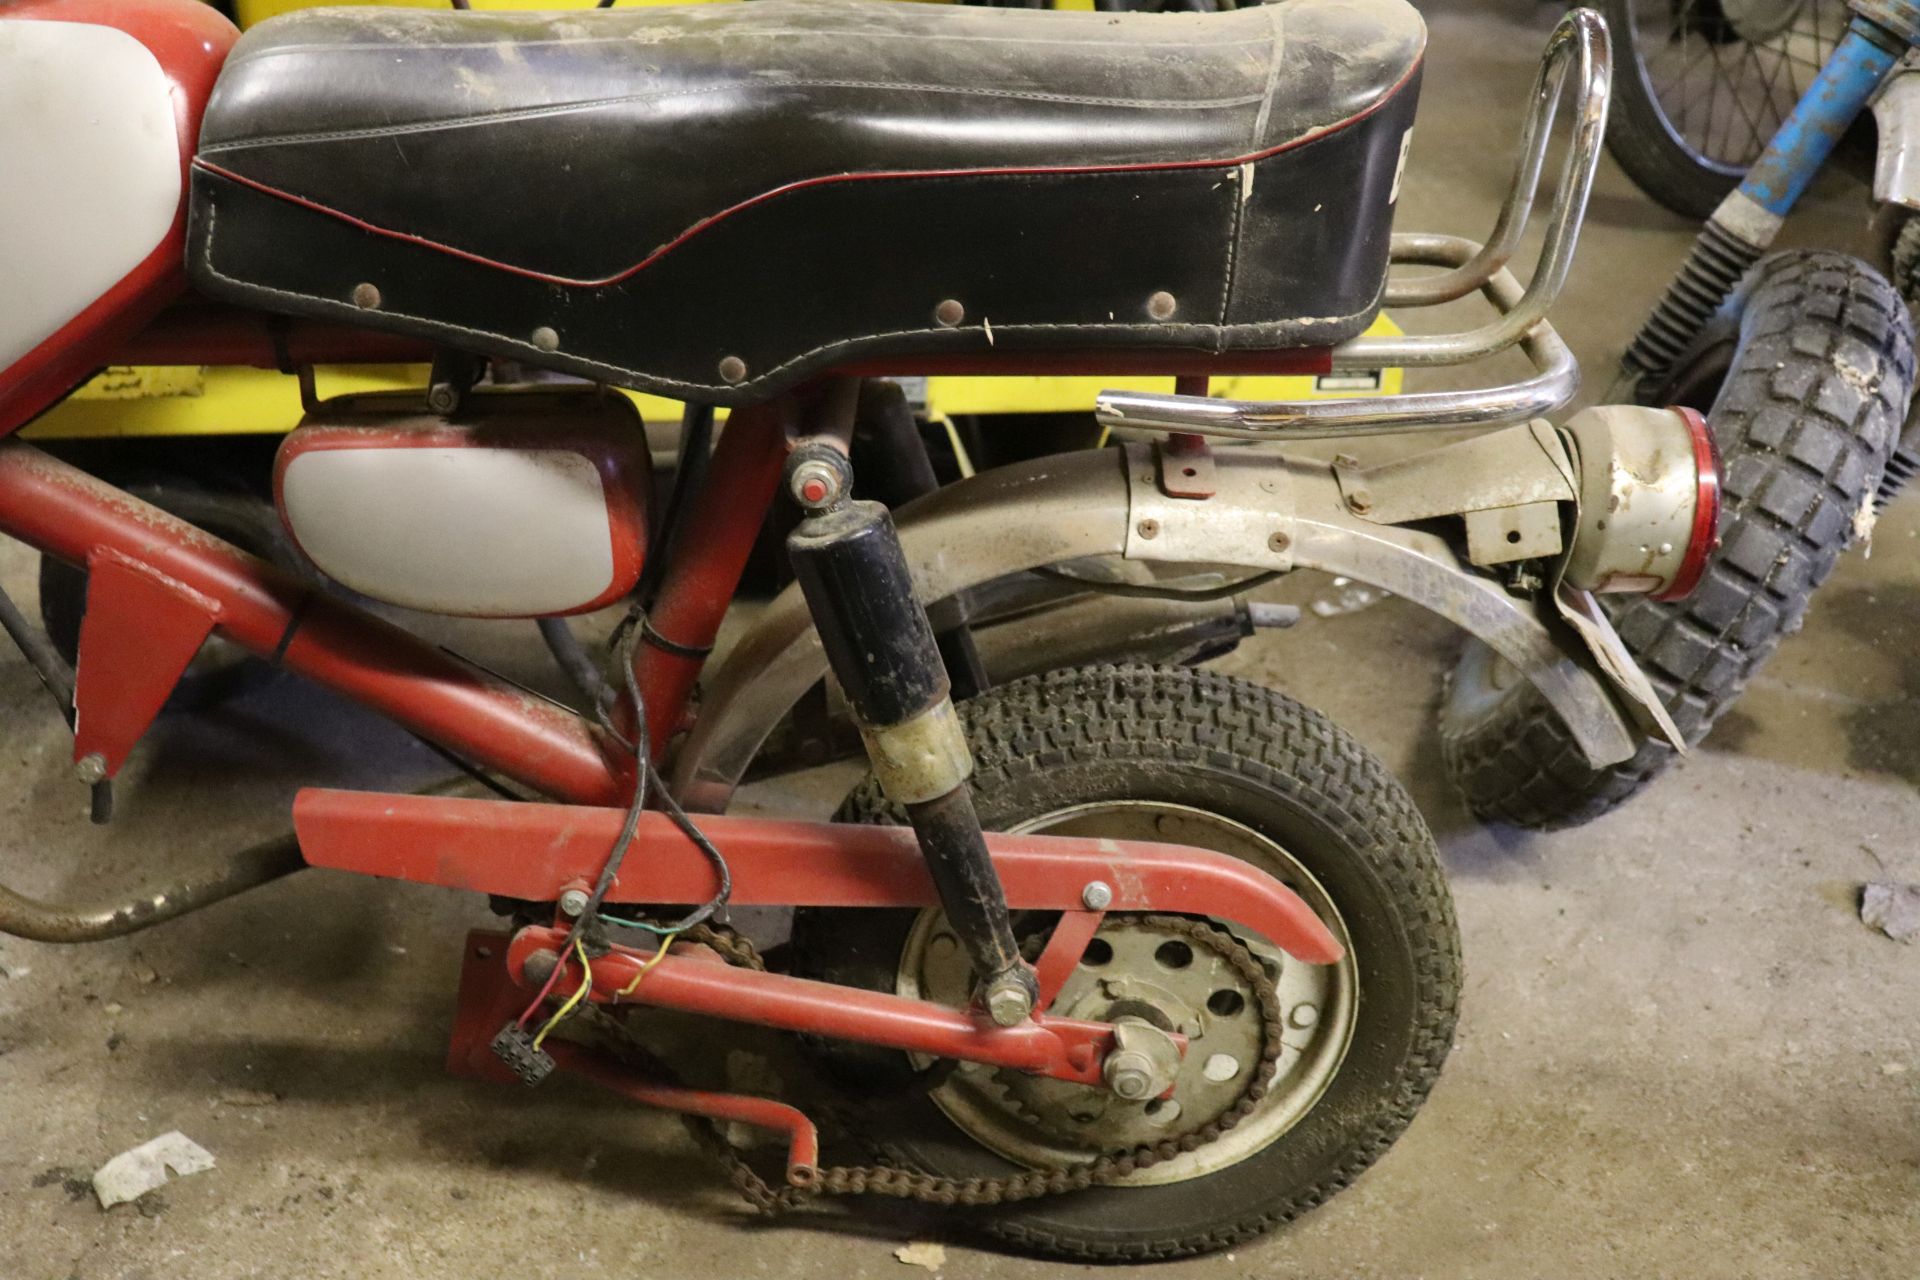 1970 Benelli Buzzer, rolling chassis, 1,262 miles, serial #537684 MINI BIKES MARKED AS PARTS BIKES, - Image 2 of 7